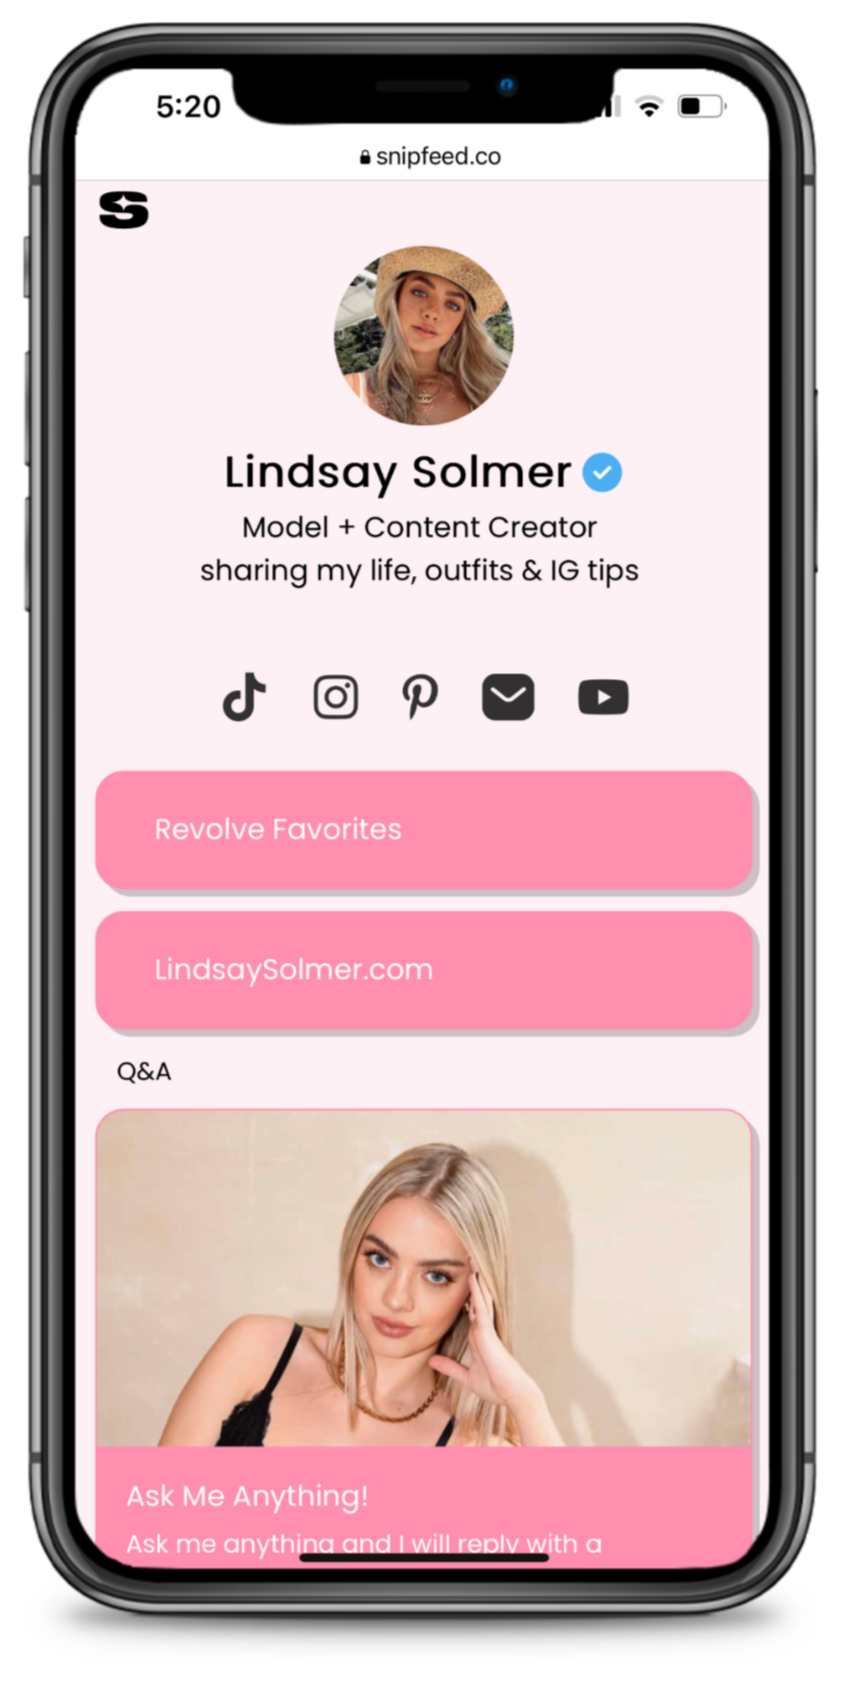 Lindsay Solmer Snipfeed page